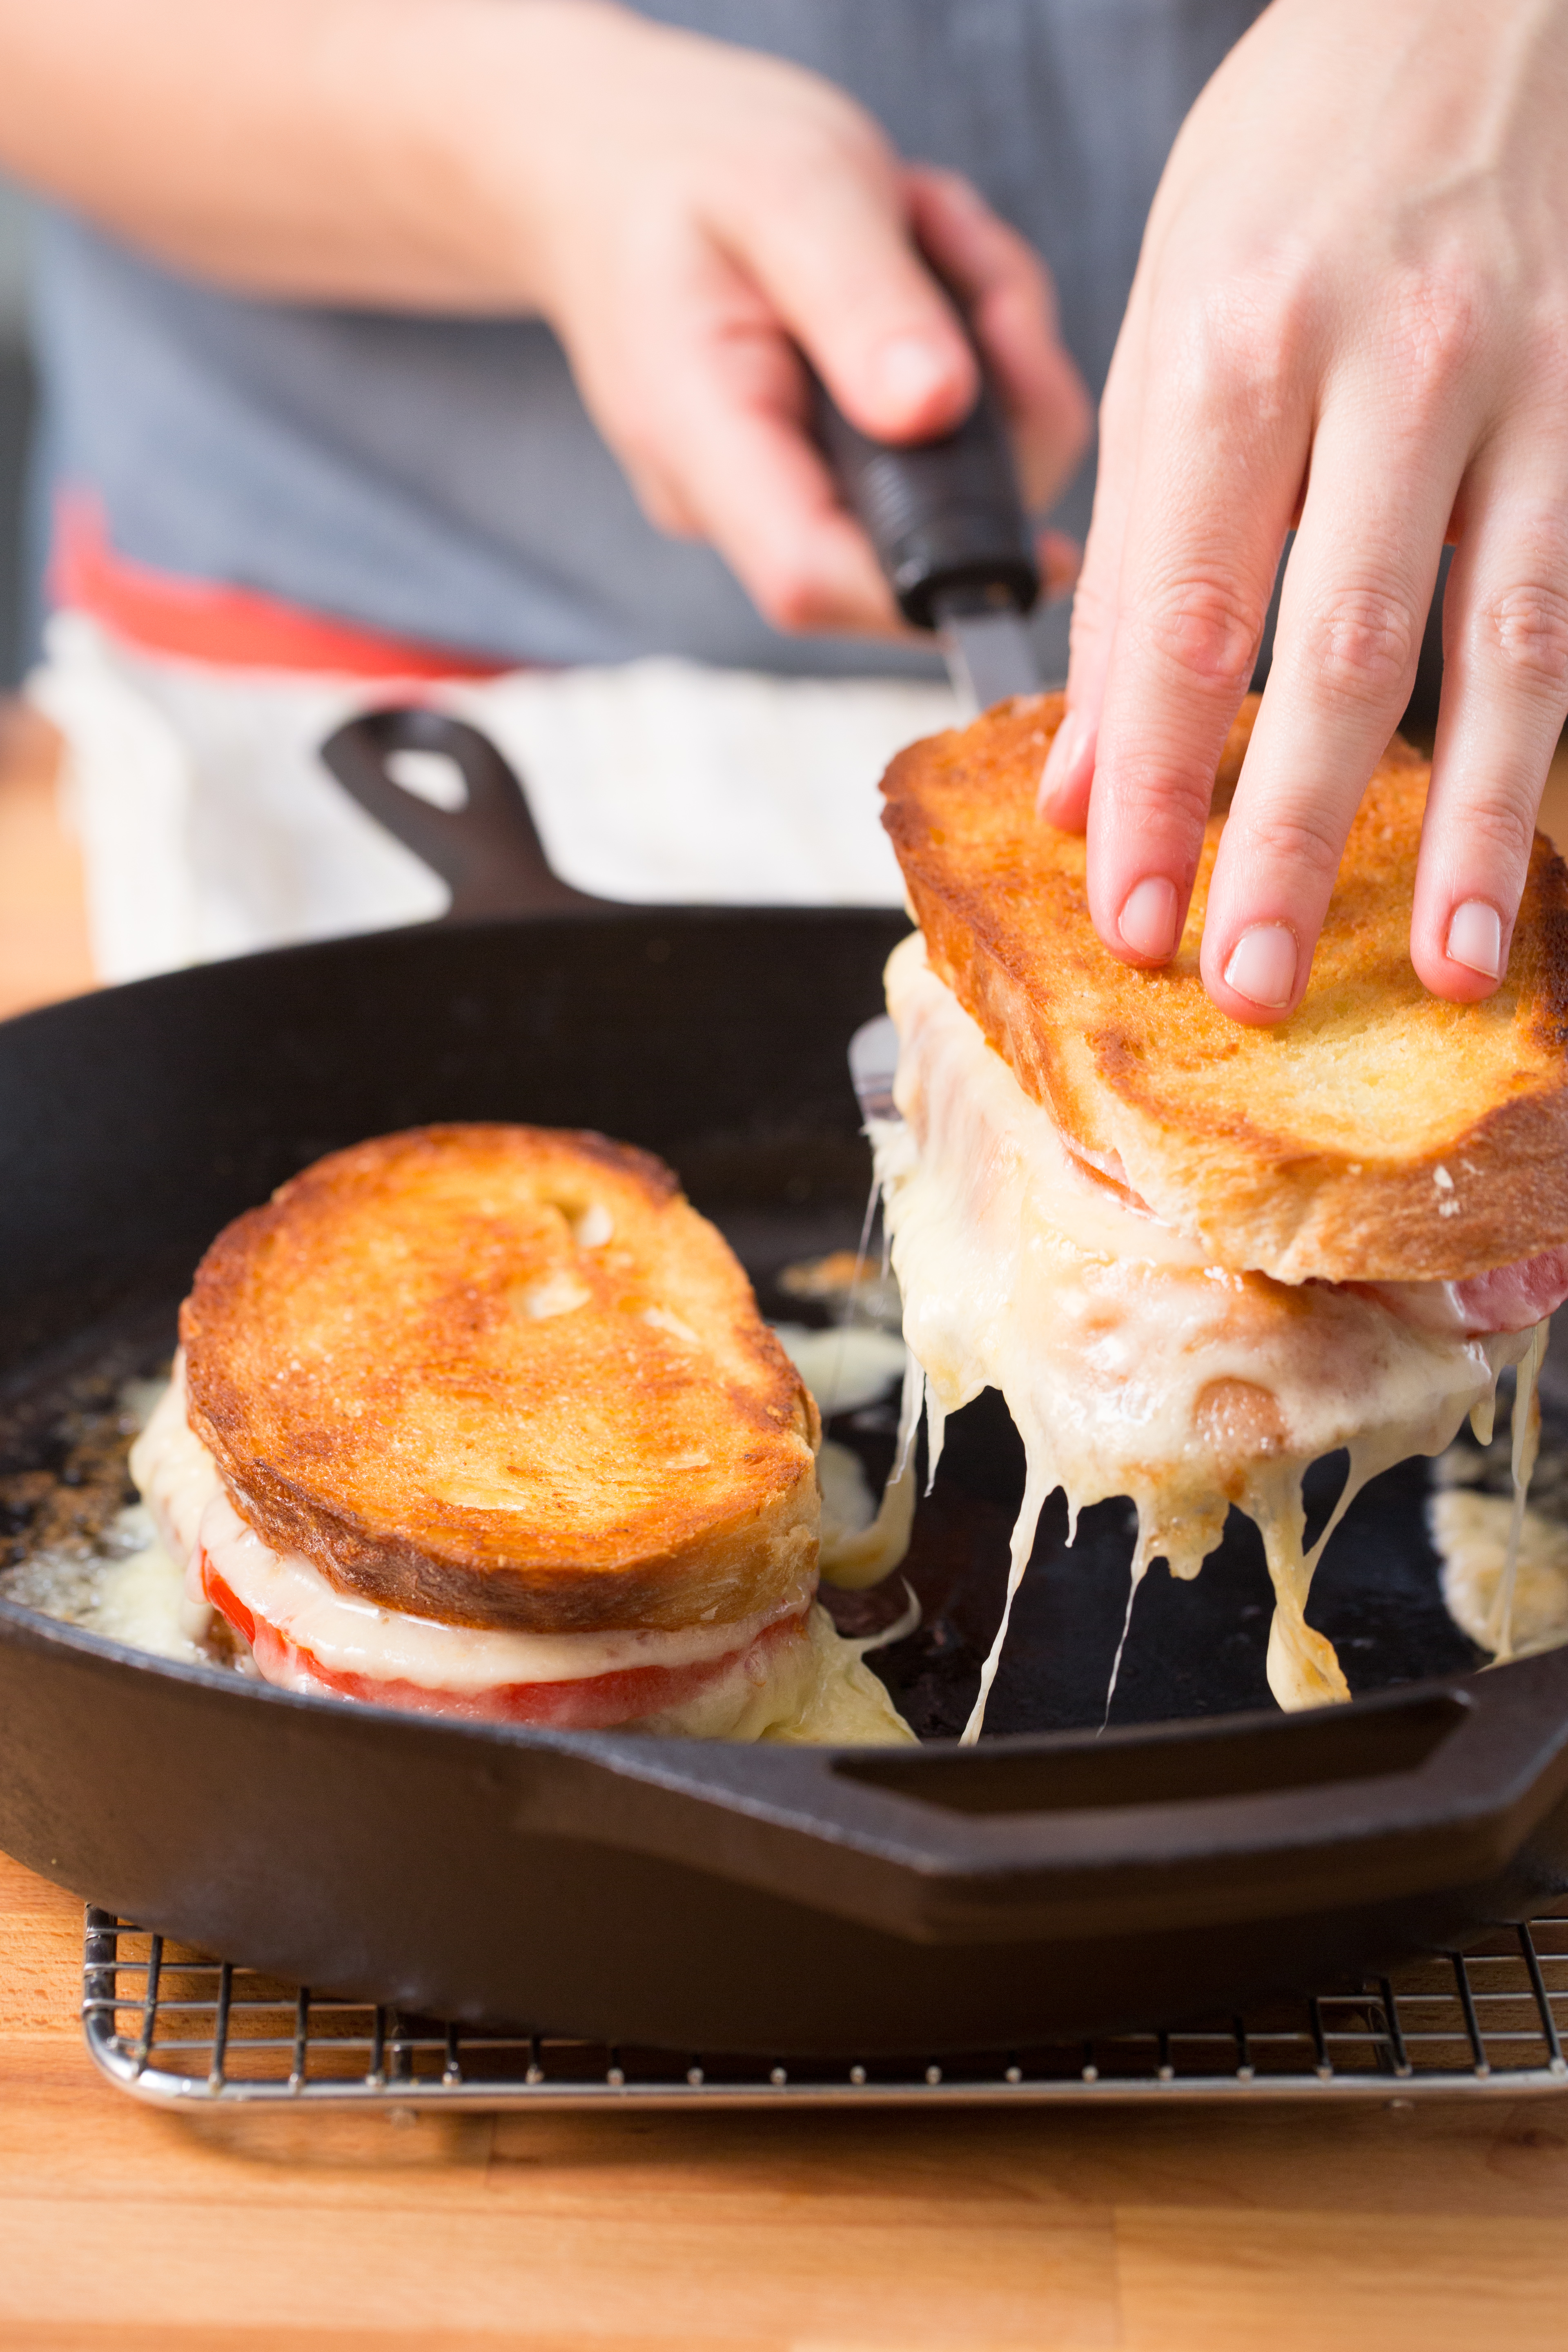 Grilled Cheese & Tomato Sandwich, Recipes